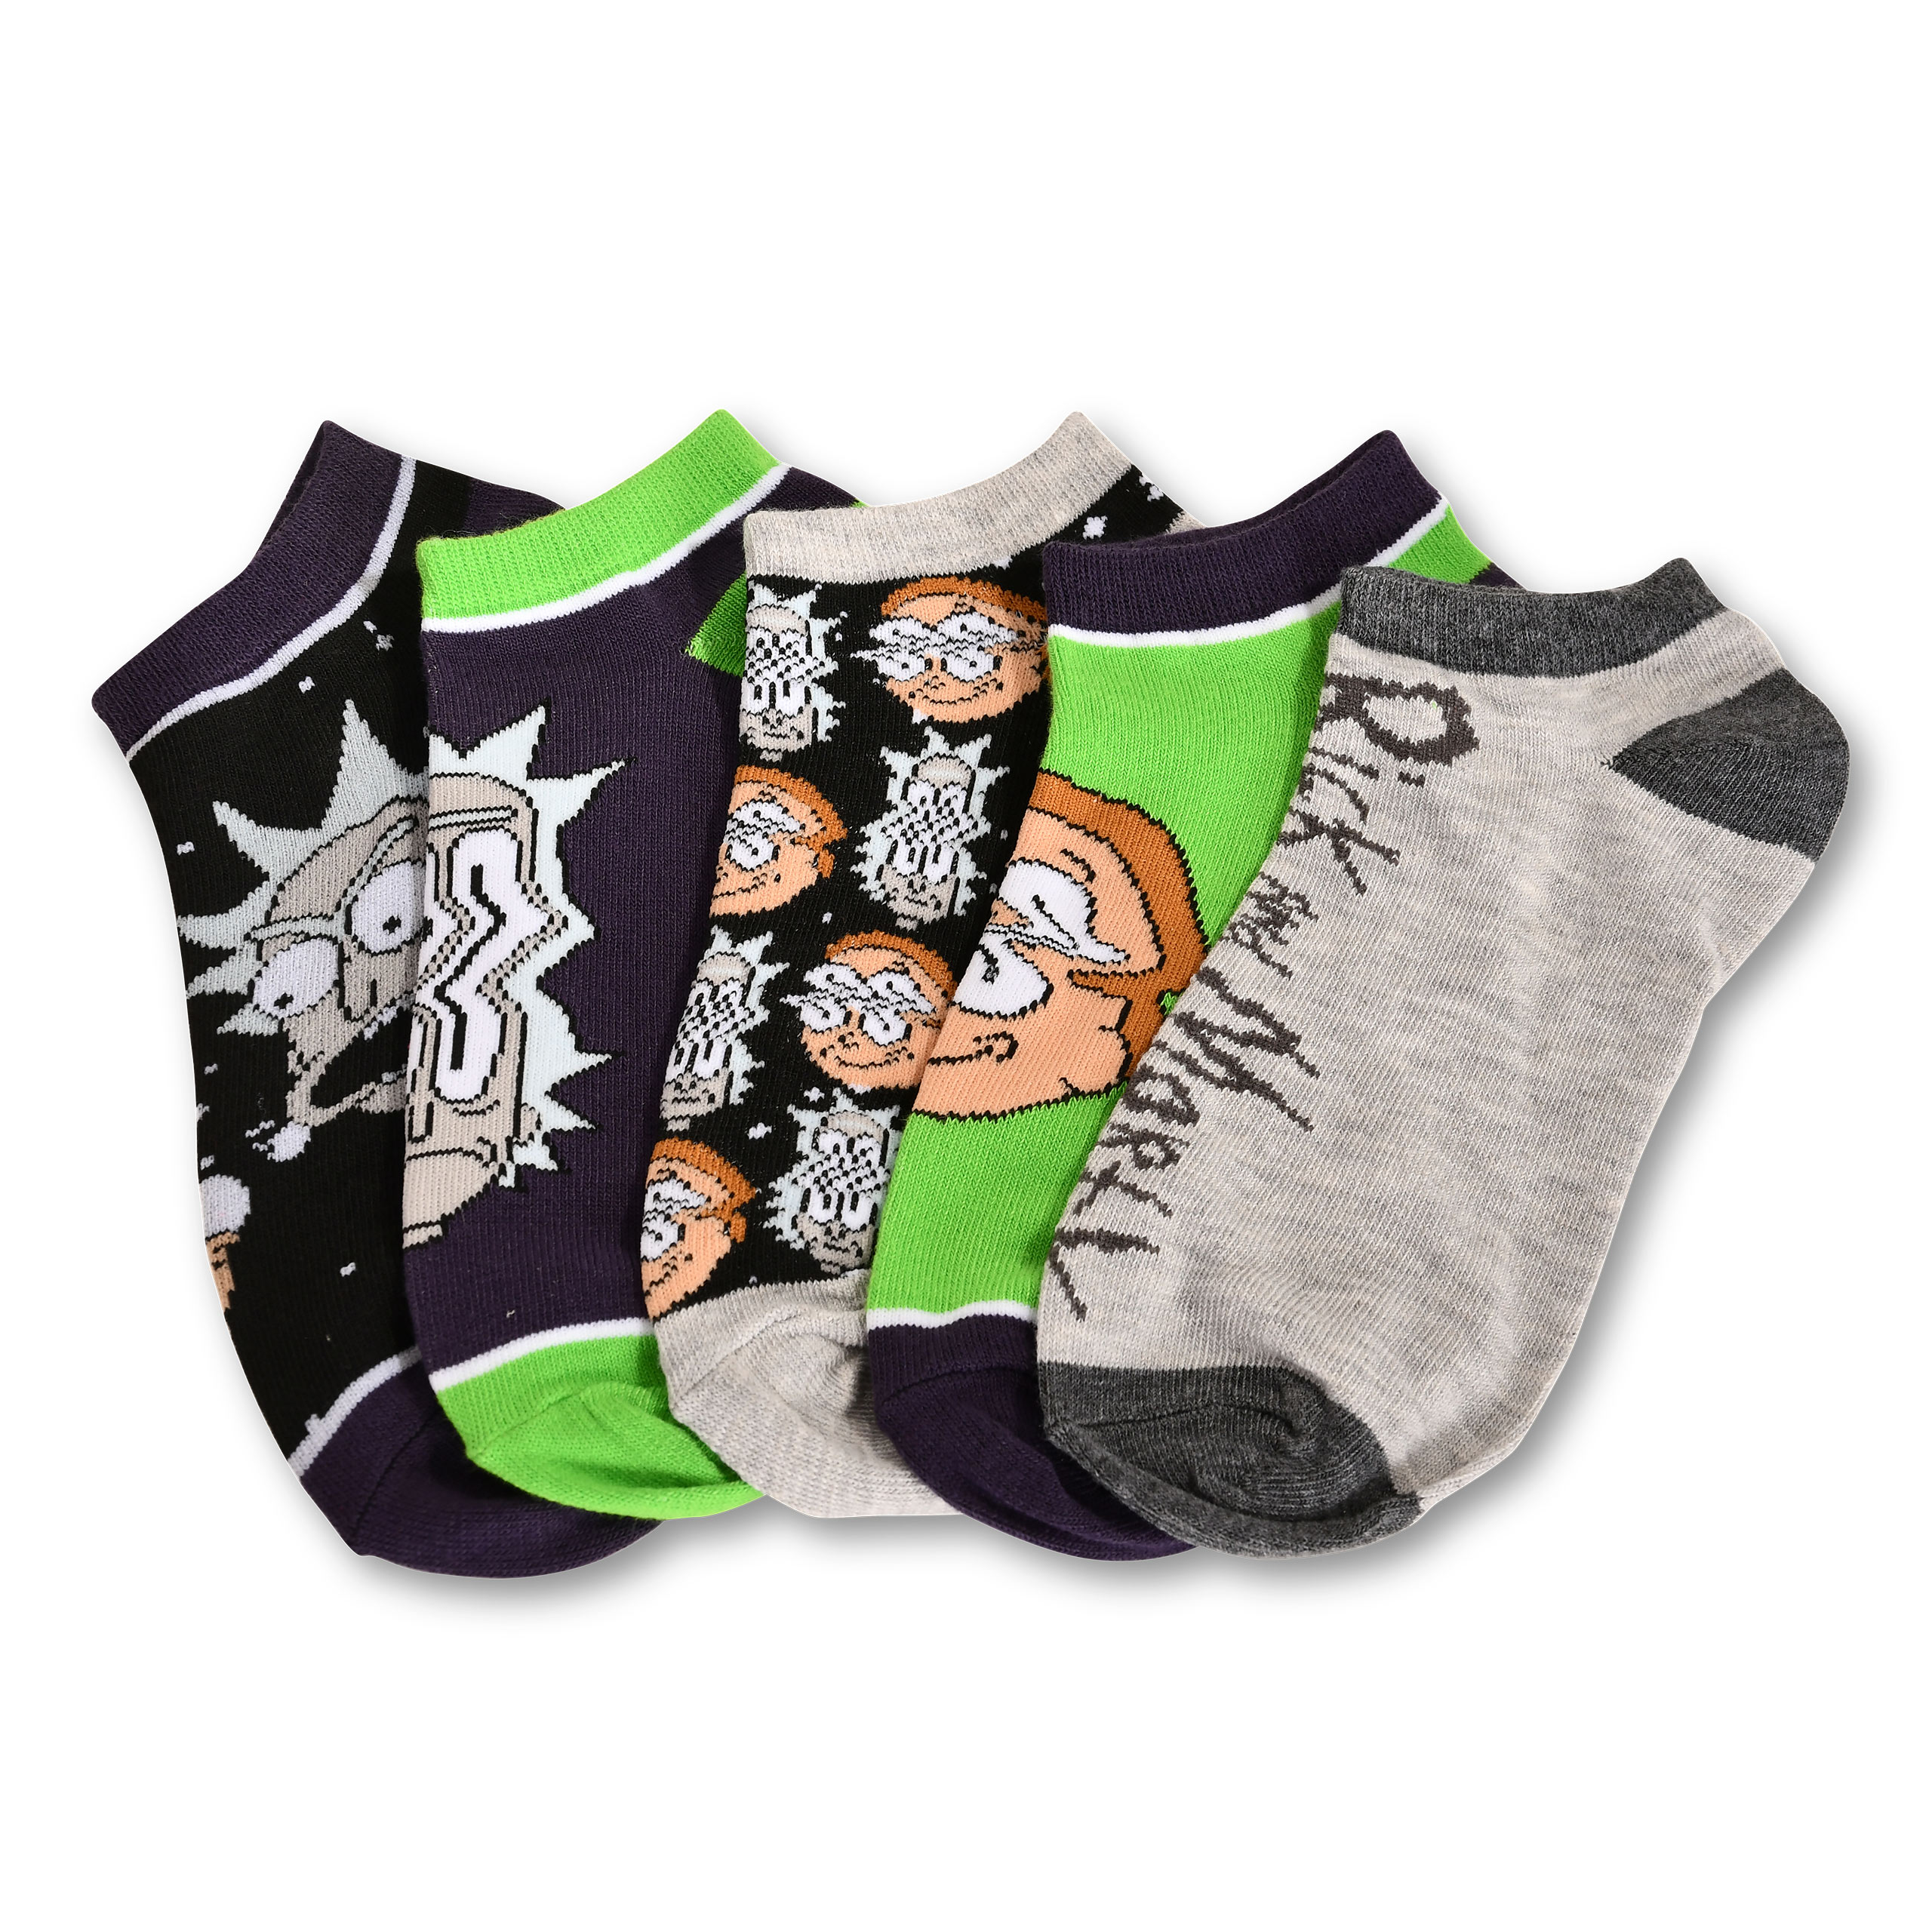 Rick and Morty - Characters & Icons Socken 5er Set